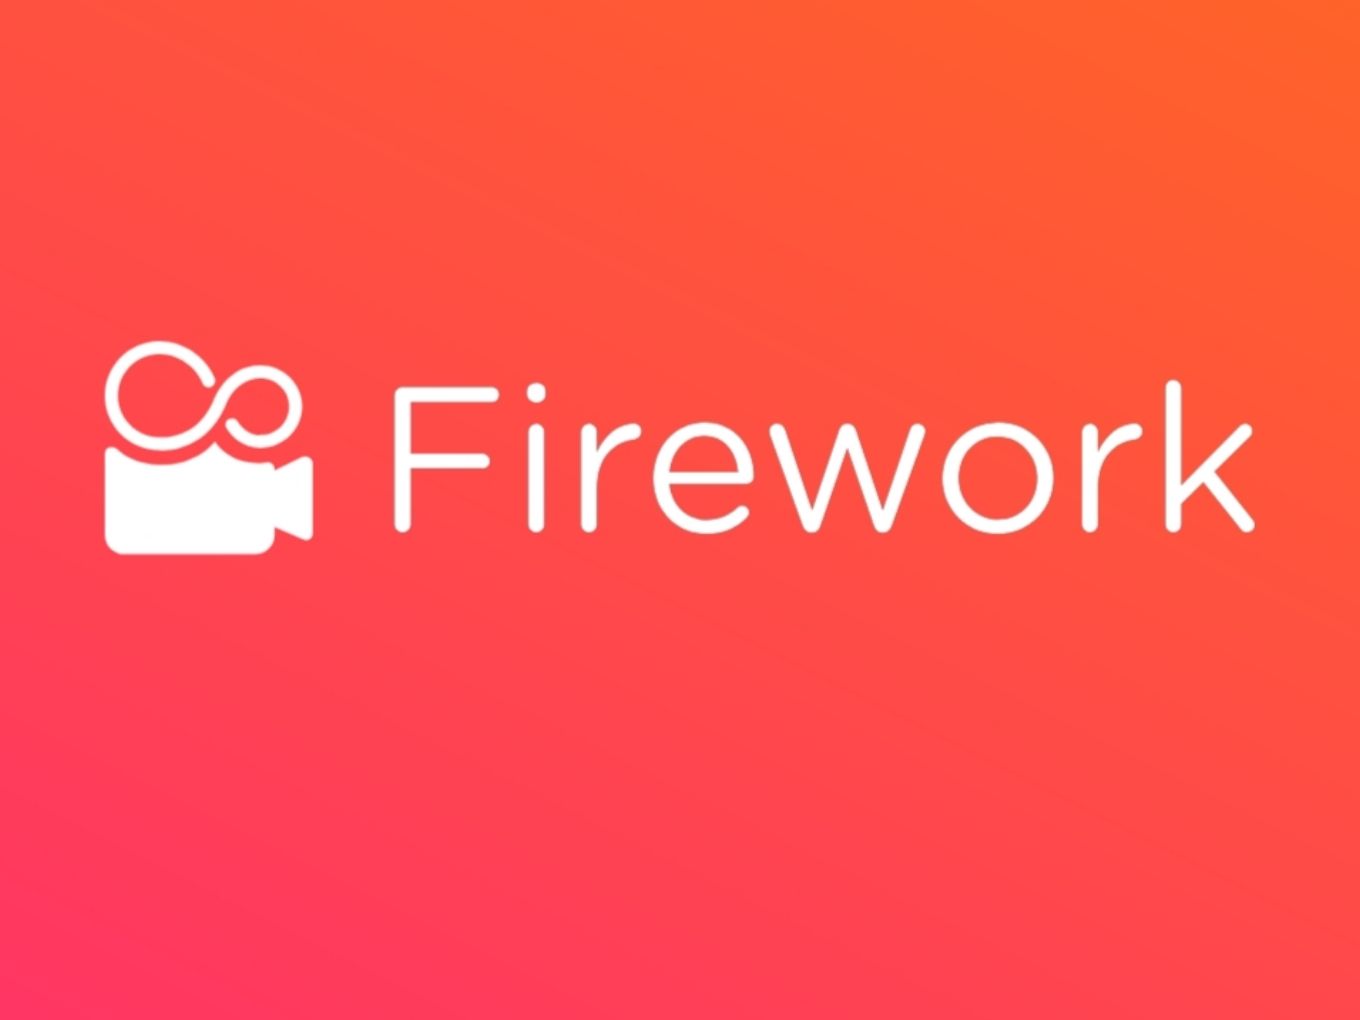 Firework Plans To Pump $20 Mn In India: Should TikTok Be Worried?